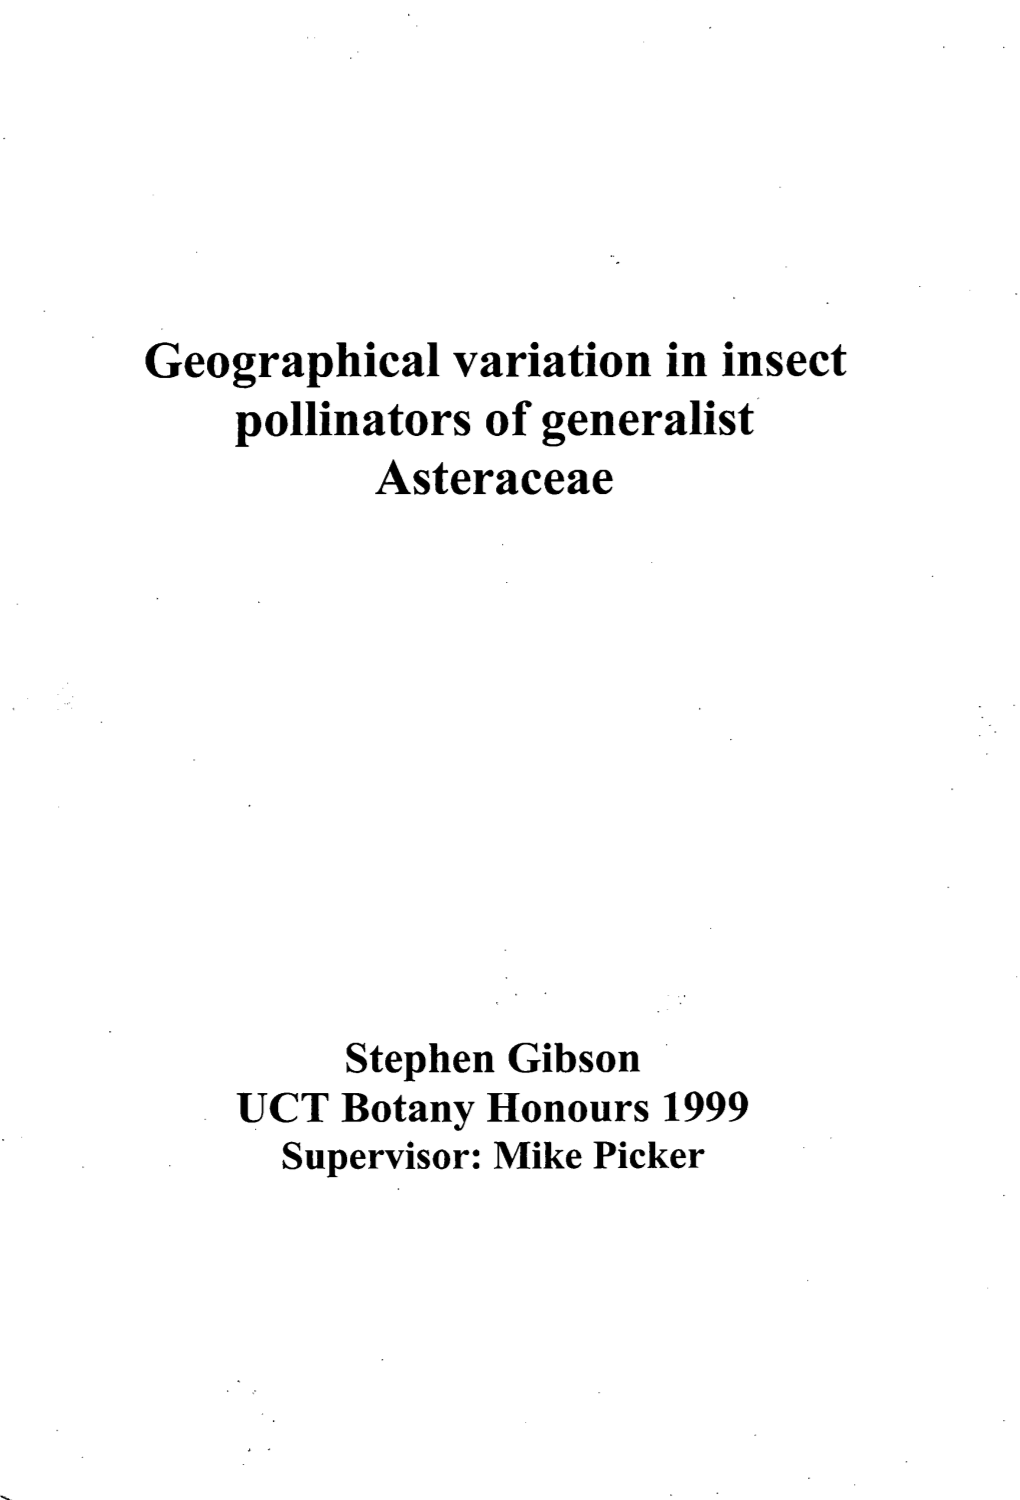 Geographical Variation in Insect Pollinators of Generalist Asteraceae